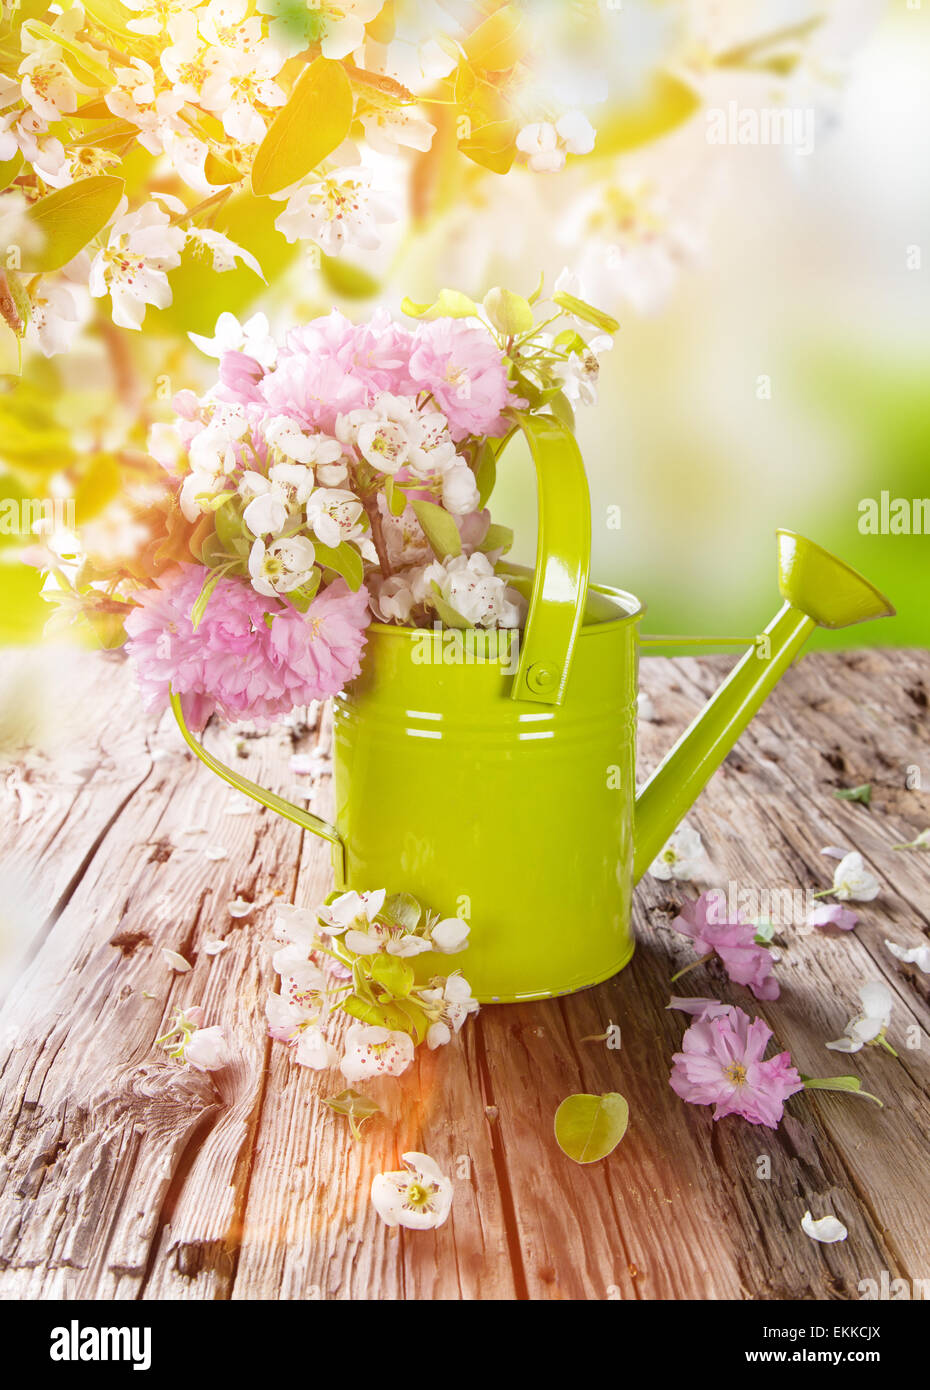 Spring background with beautiful blossoms and can Stock Photo